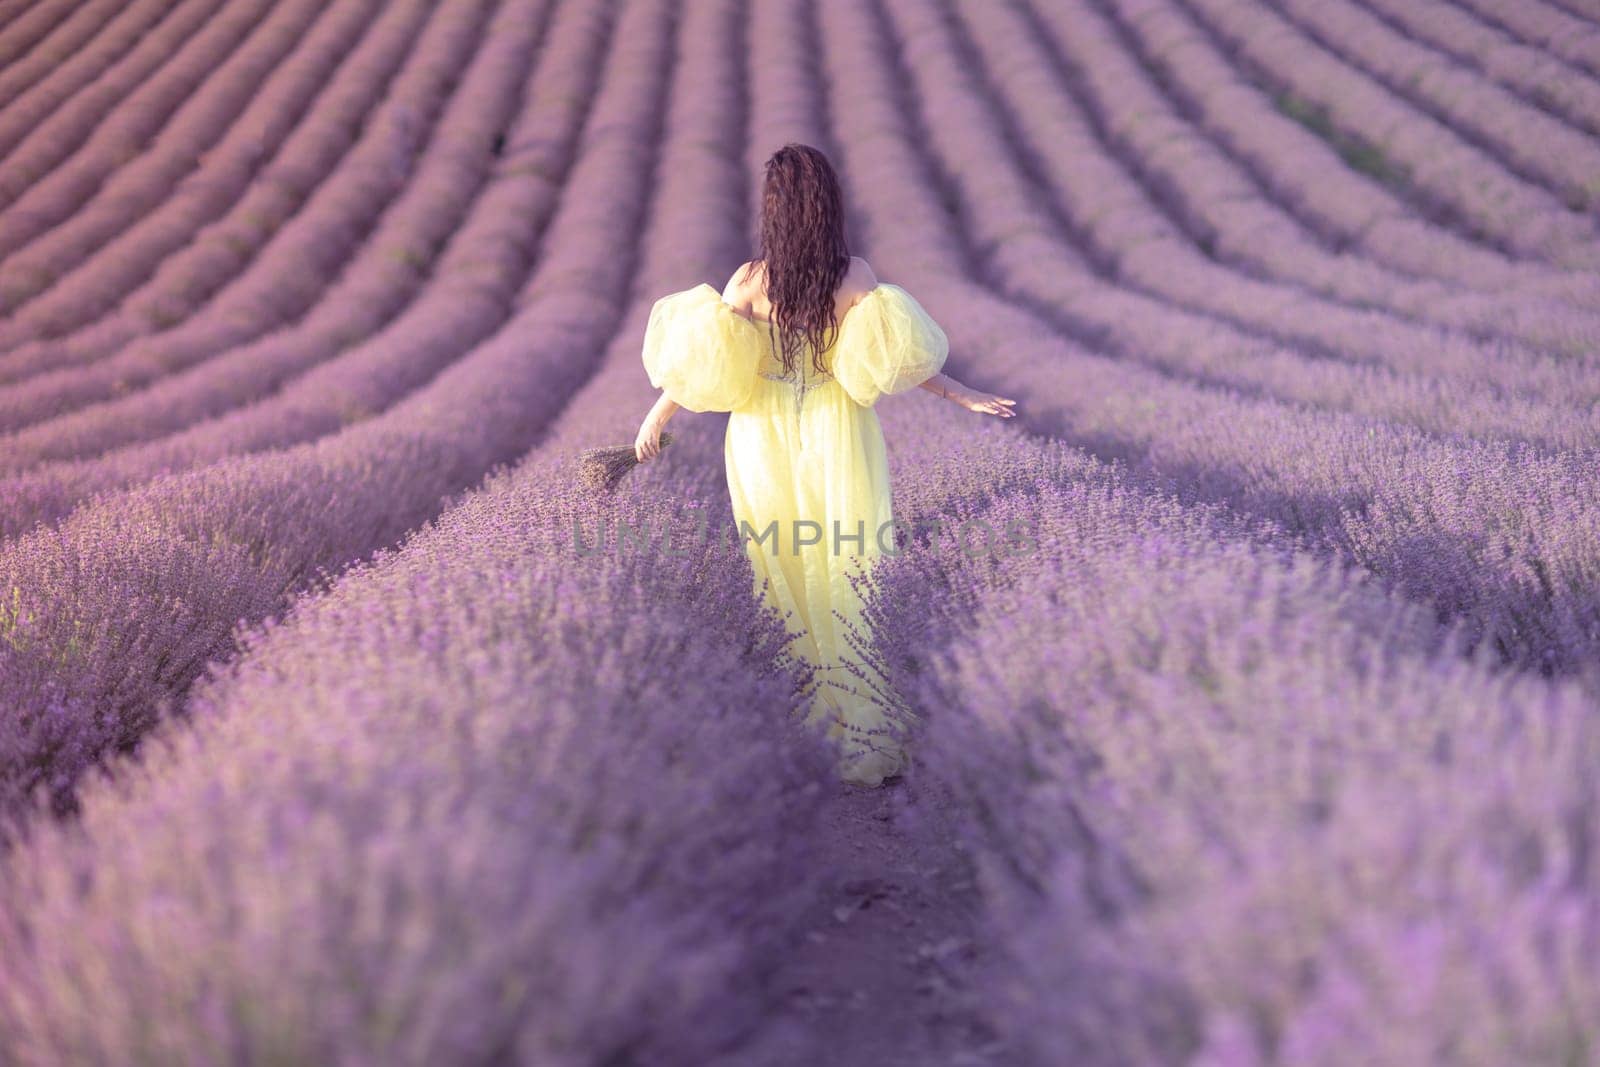 A woman in a yellow dress walks through a field of lavender. The field is full of purple flowers, and the woman is enjoying the scenery